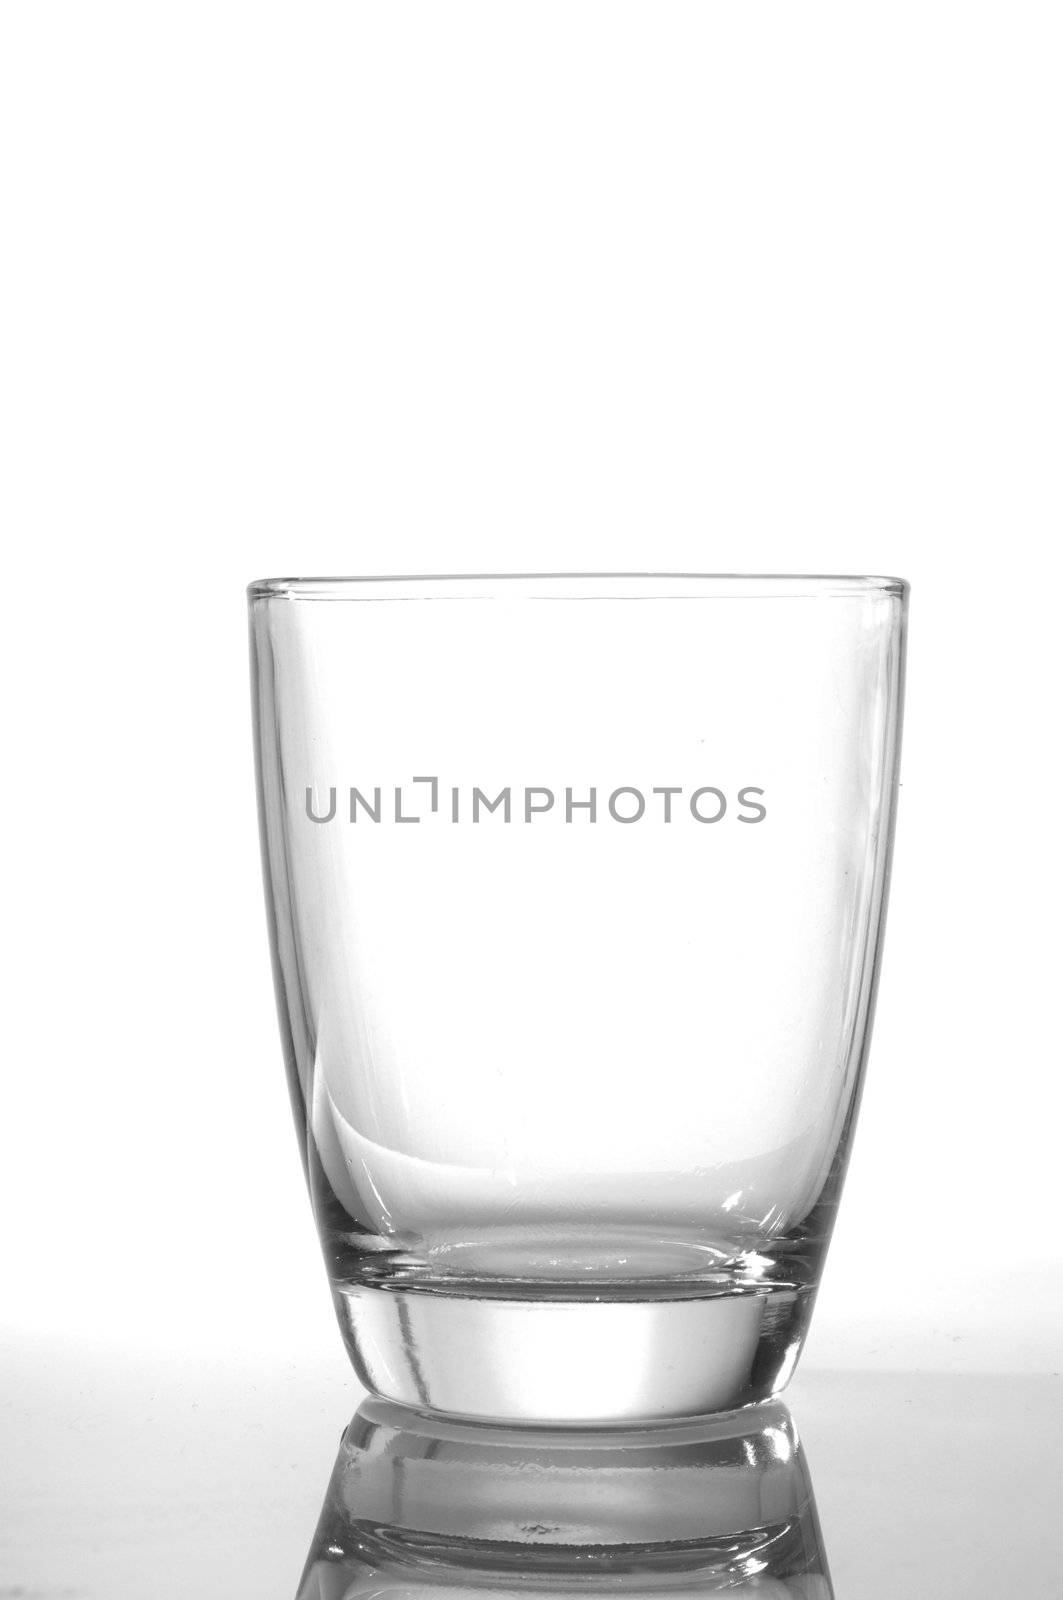 photo of pouring water and glass on white background